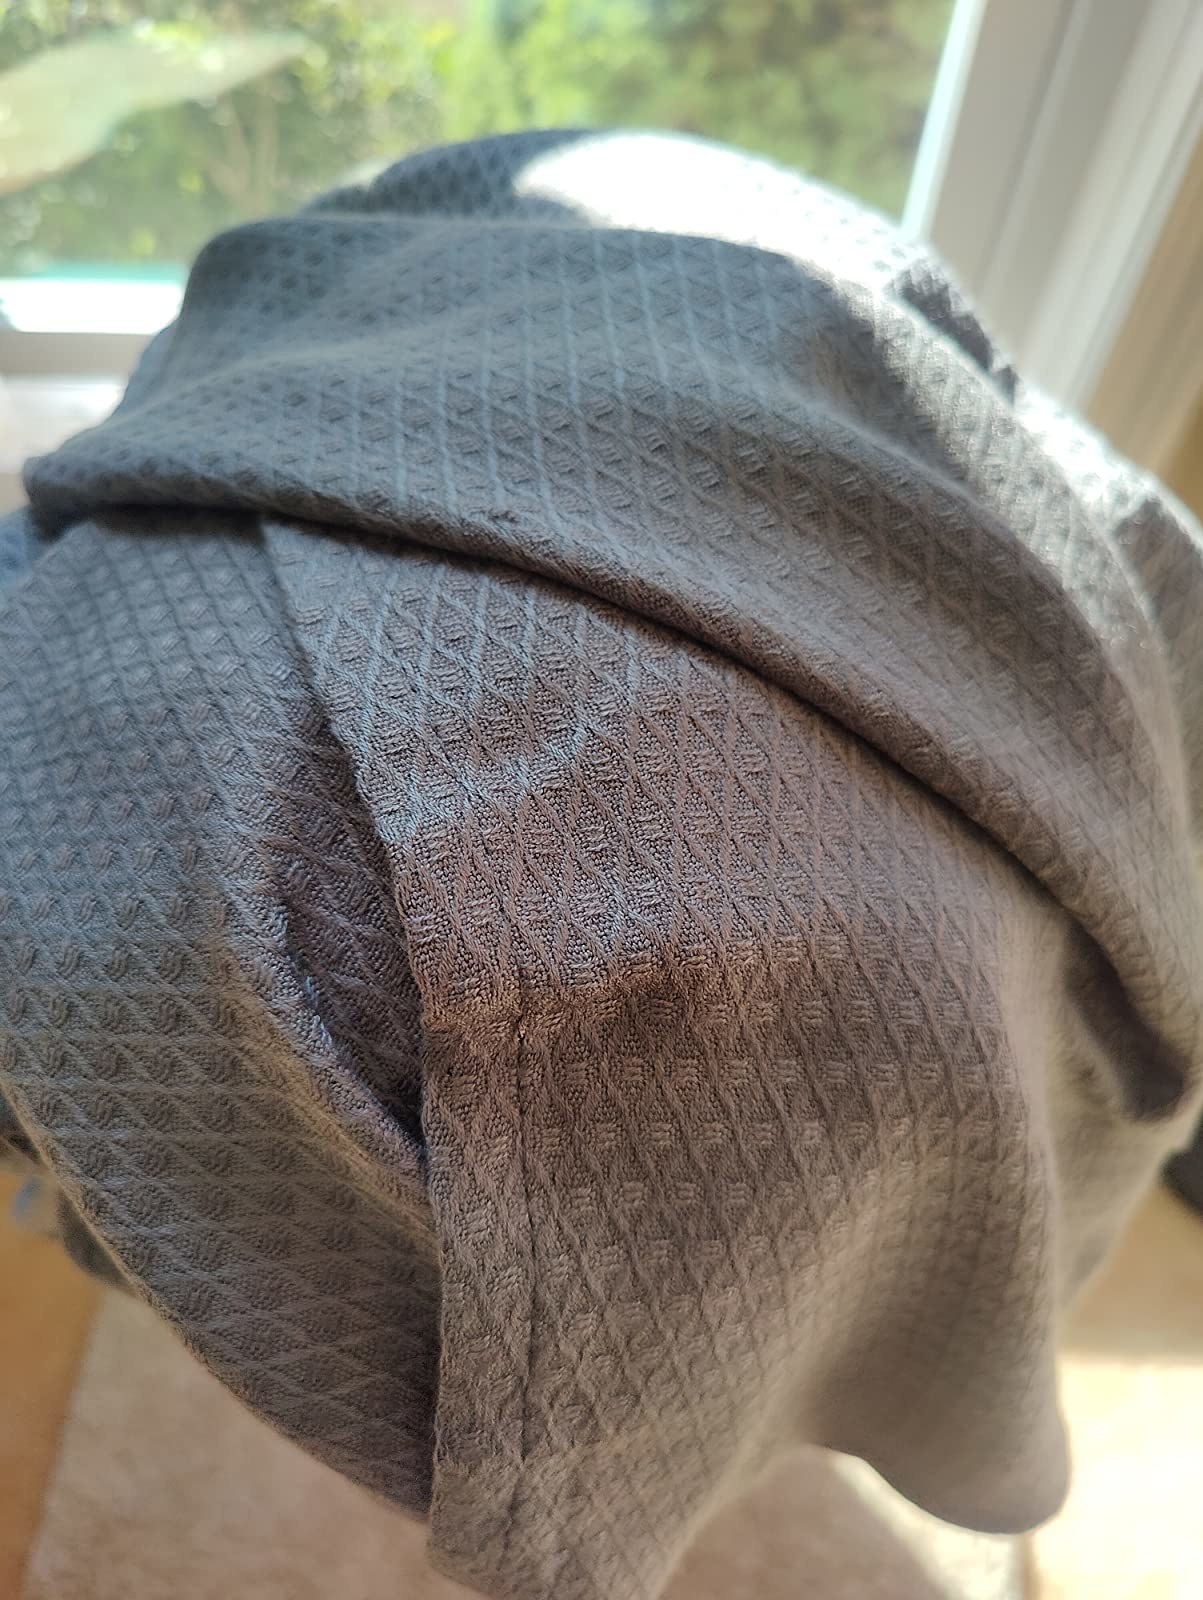 reviewer&#x27;s photo of the grey blanket up close